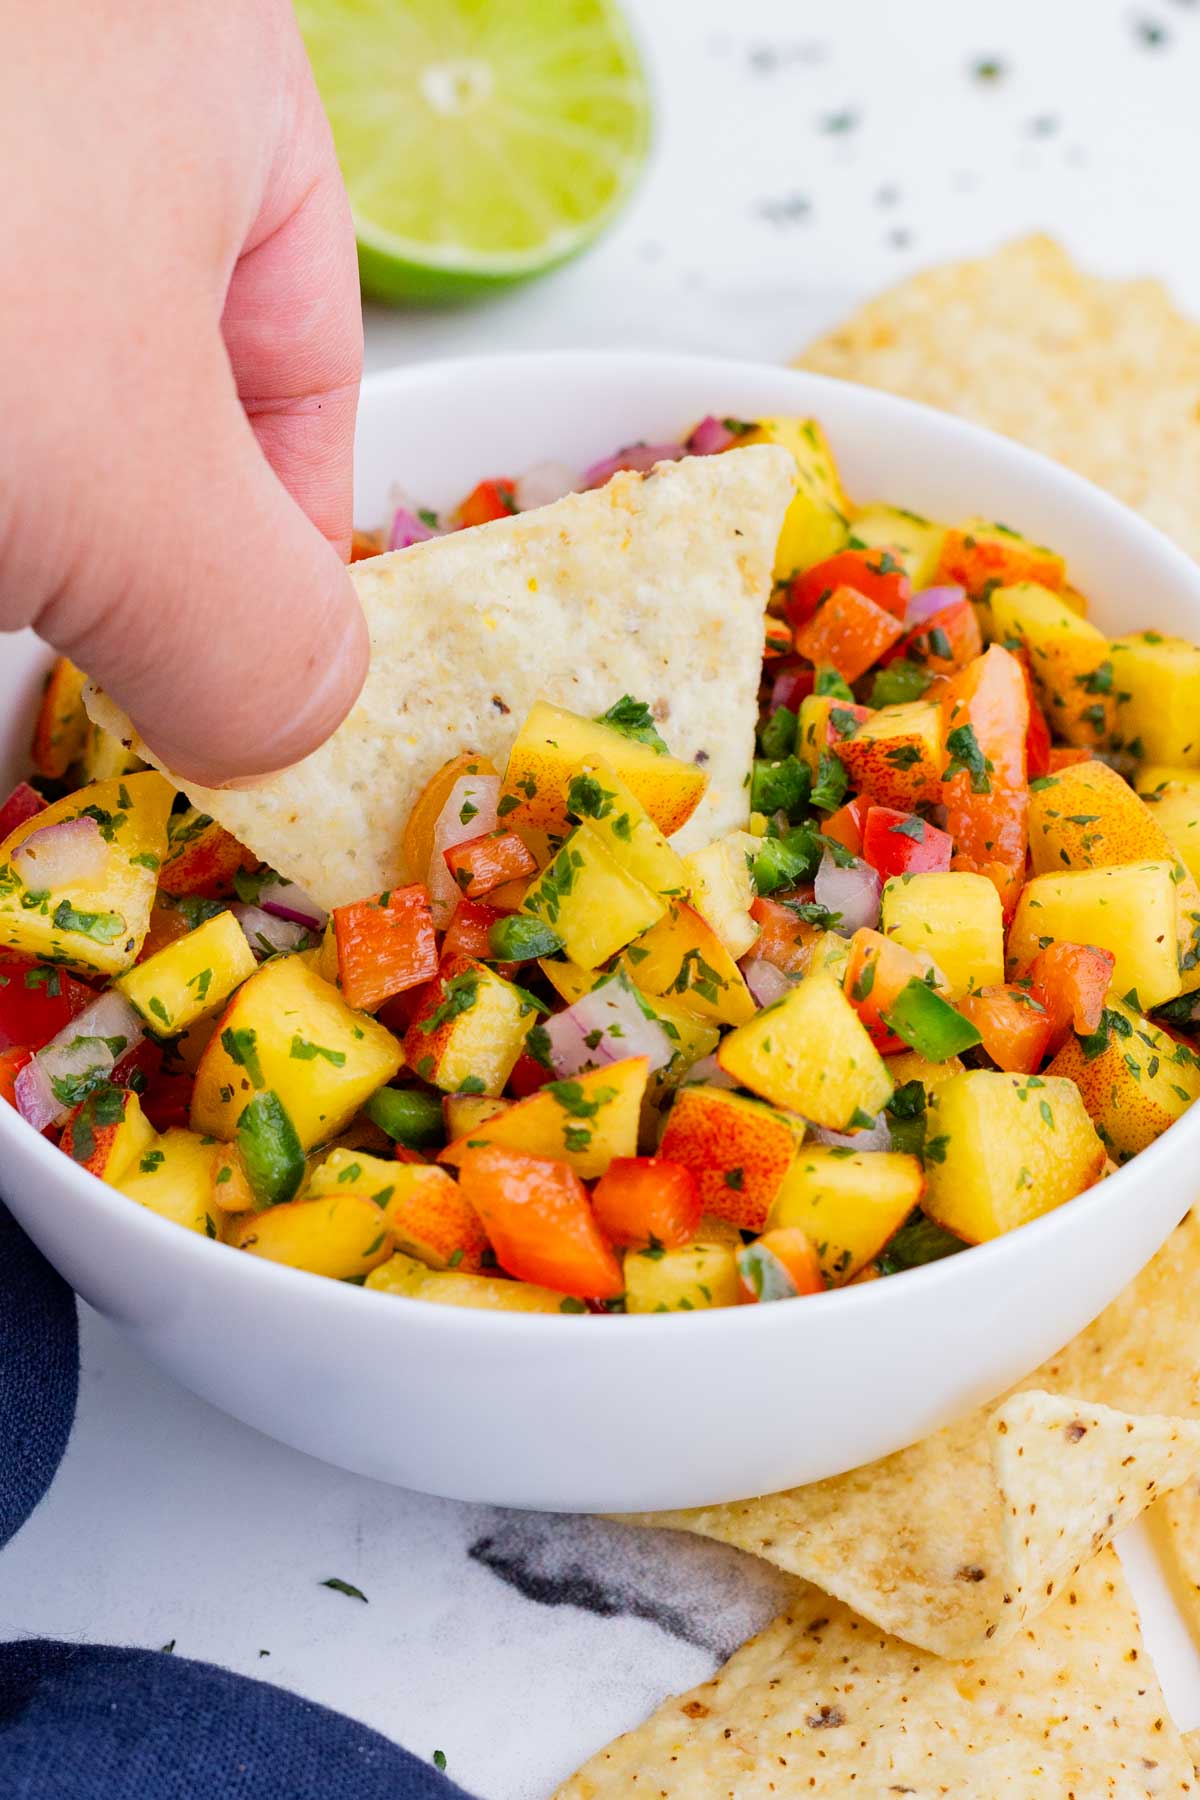 Peach Salsa is a sweet and savory dip and topping you can enjoy anytime.